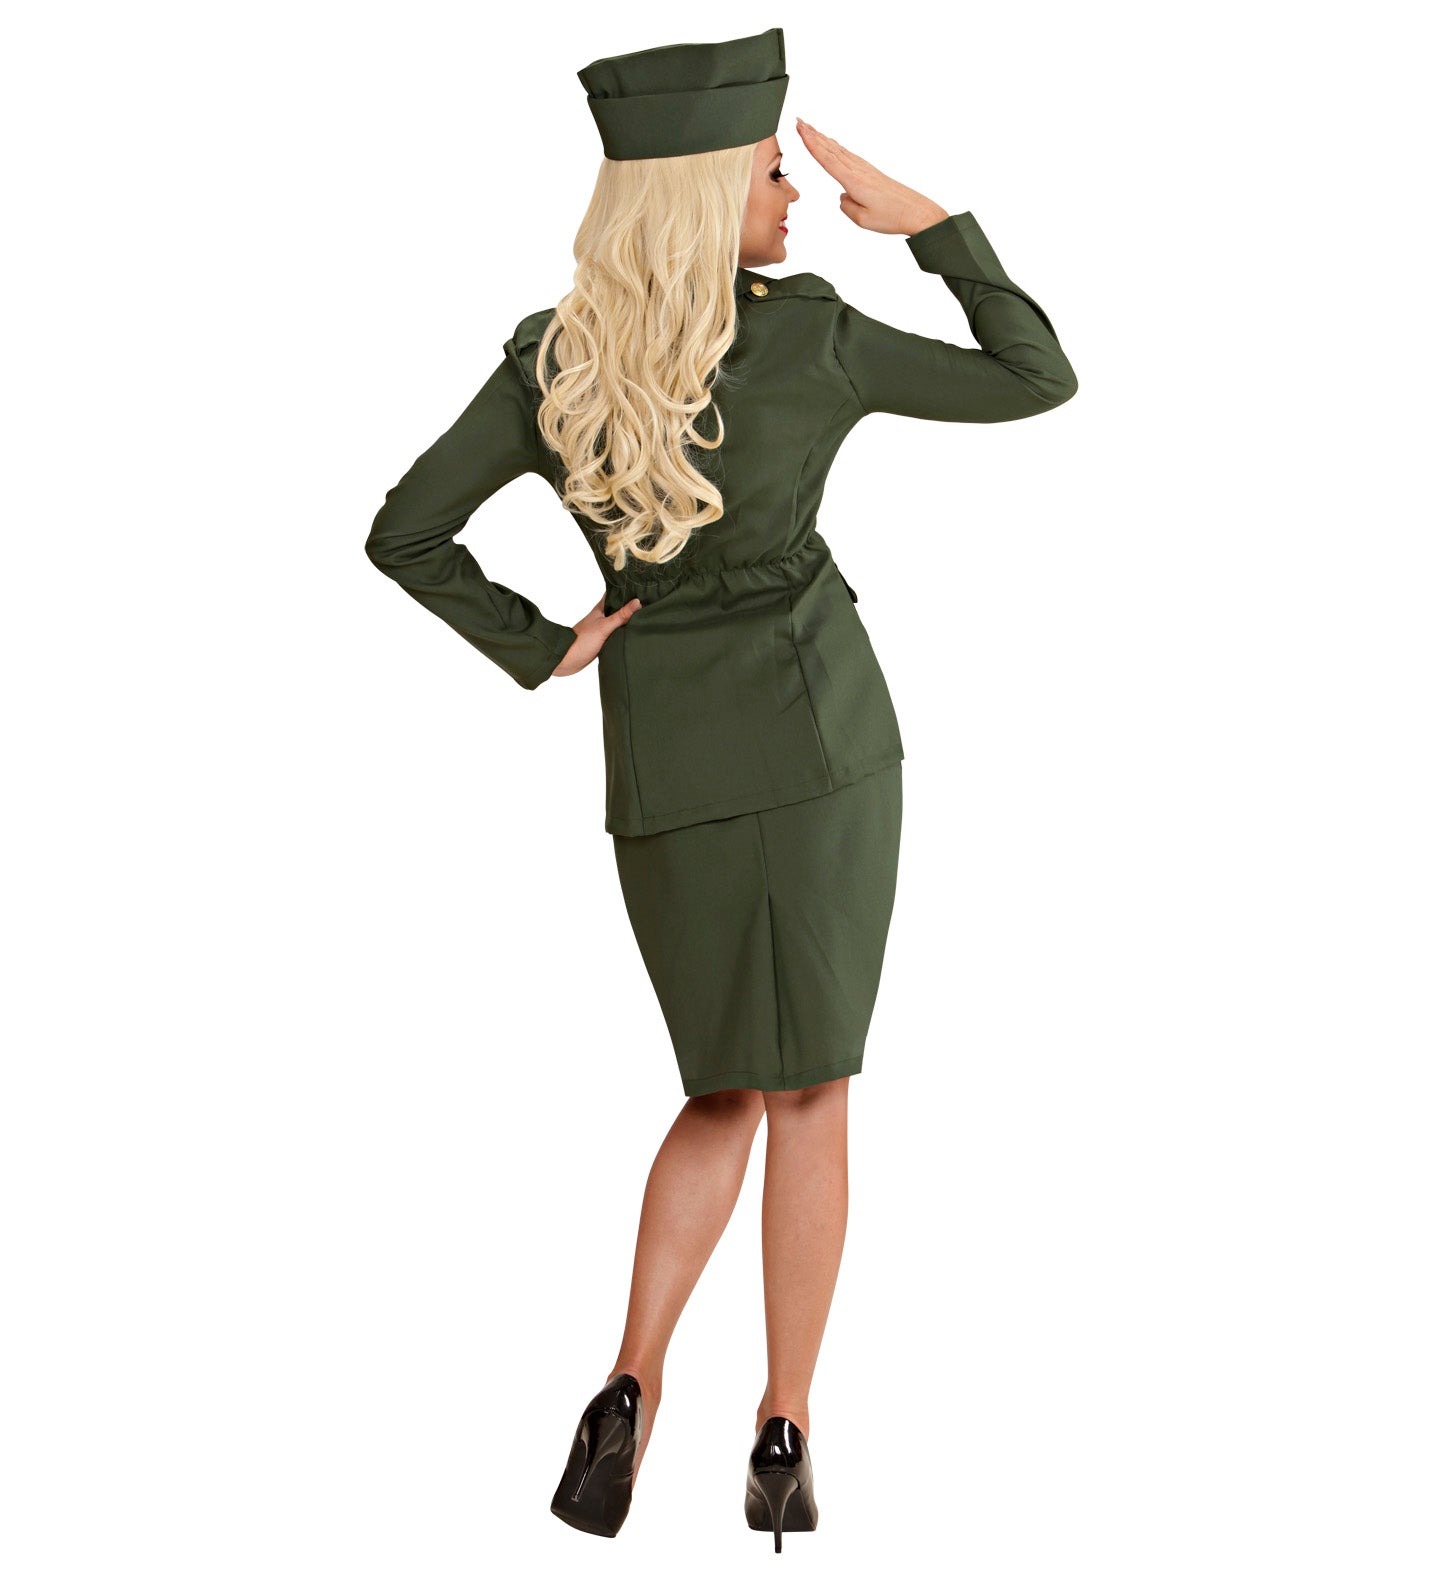 WW2 Soldier Girl army outfit rear